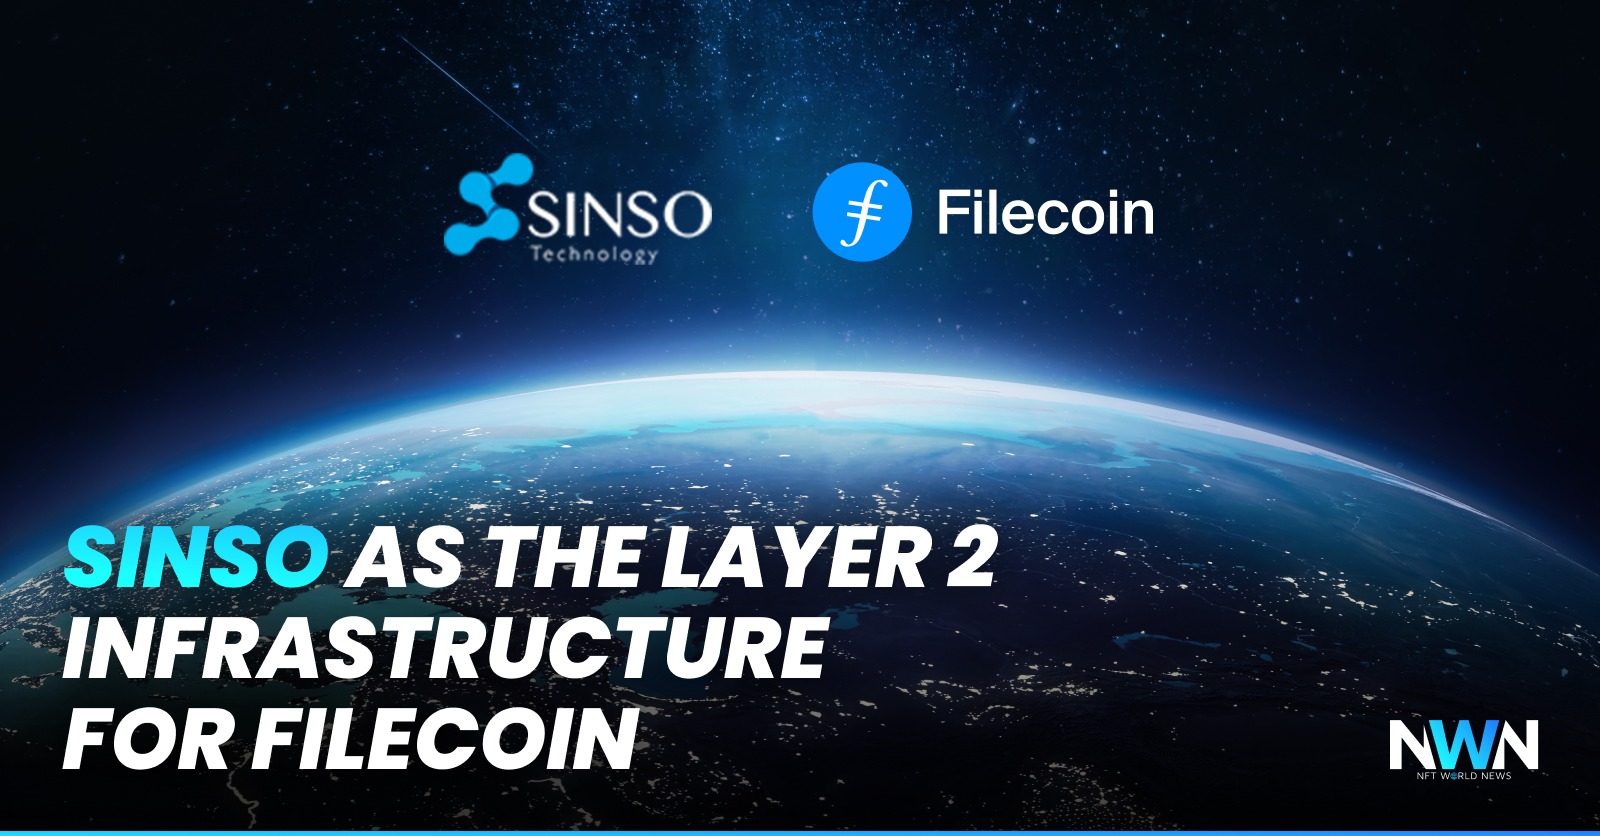 SINSO As The Layer 2 Infrastructure For Filecoin